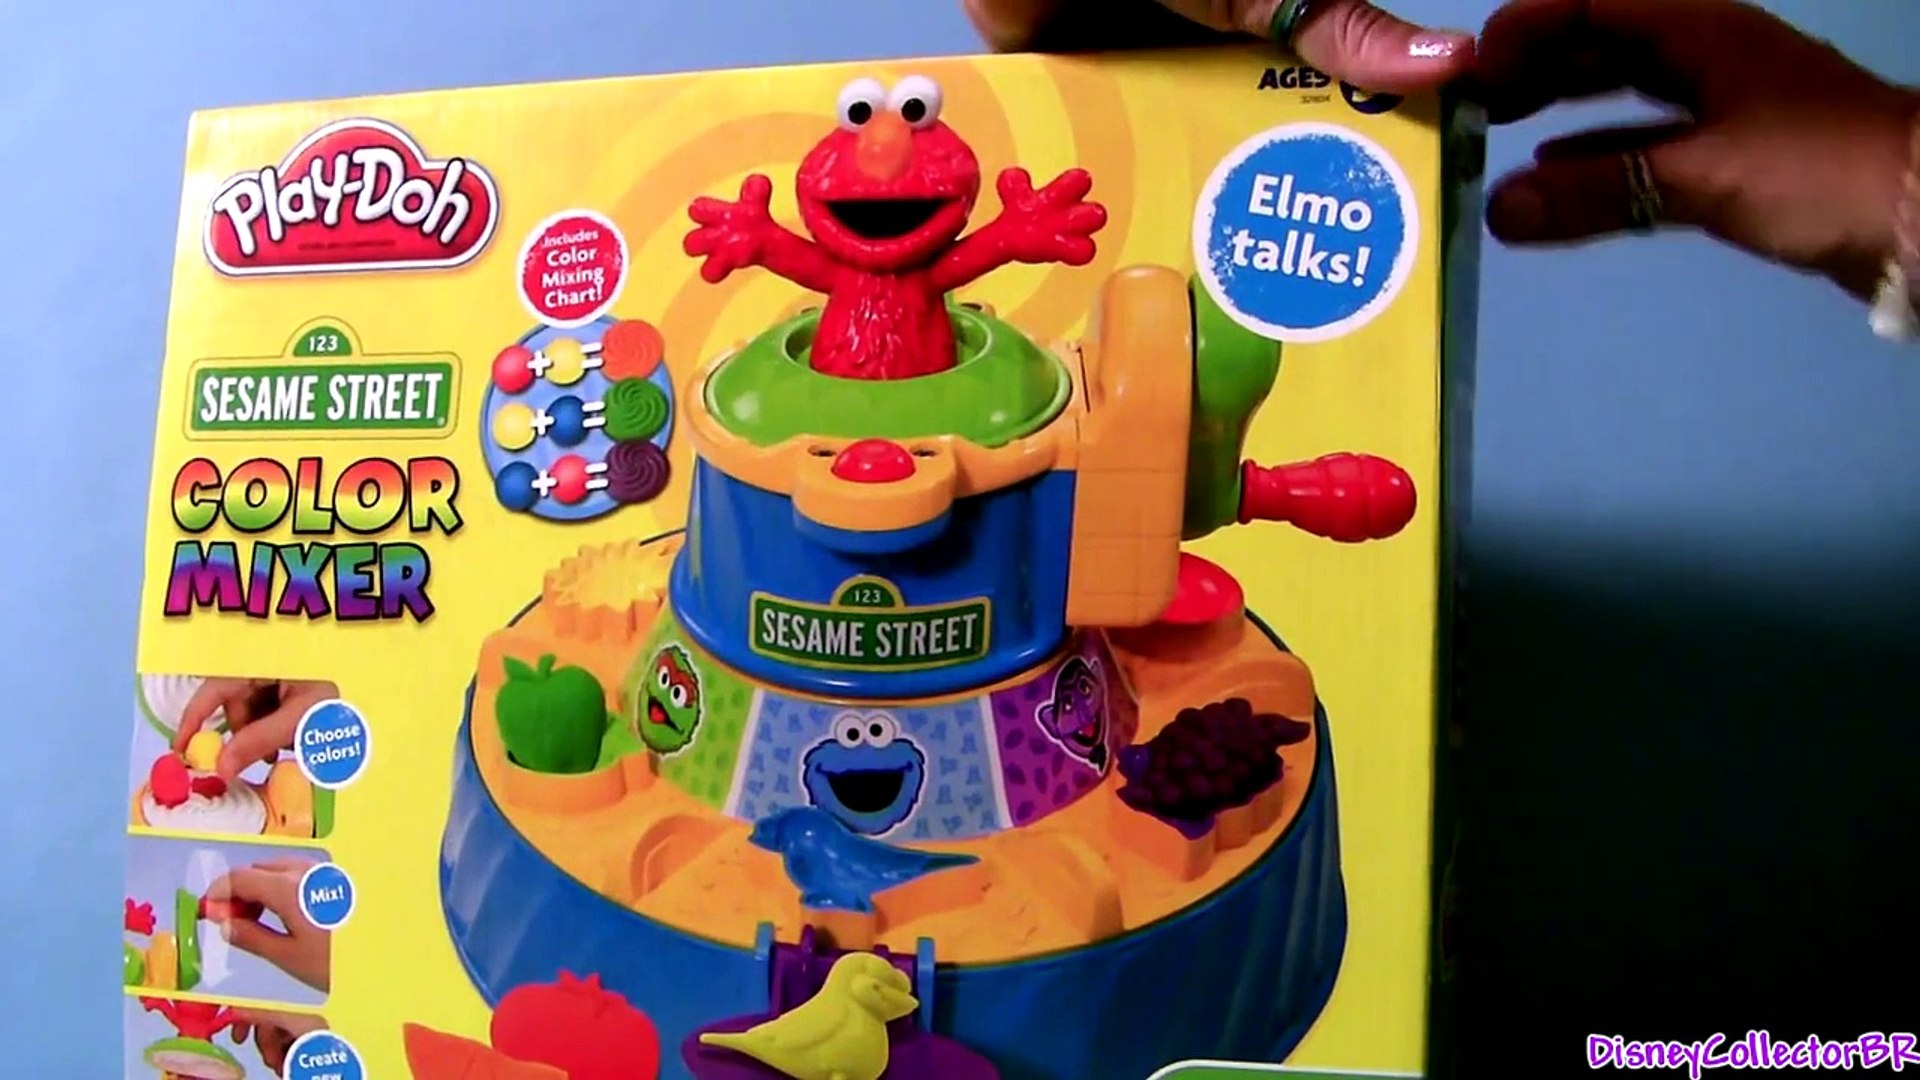 Bær meget Ironisk Play Doh Color Mixer Learn Colors as Elmo Talks With Cookie Monster Sesame  Street toy Revi - Dailymotion Video